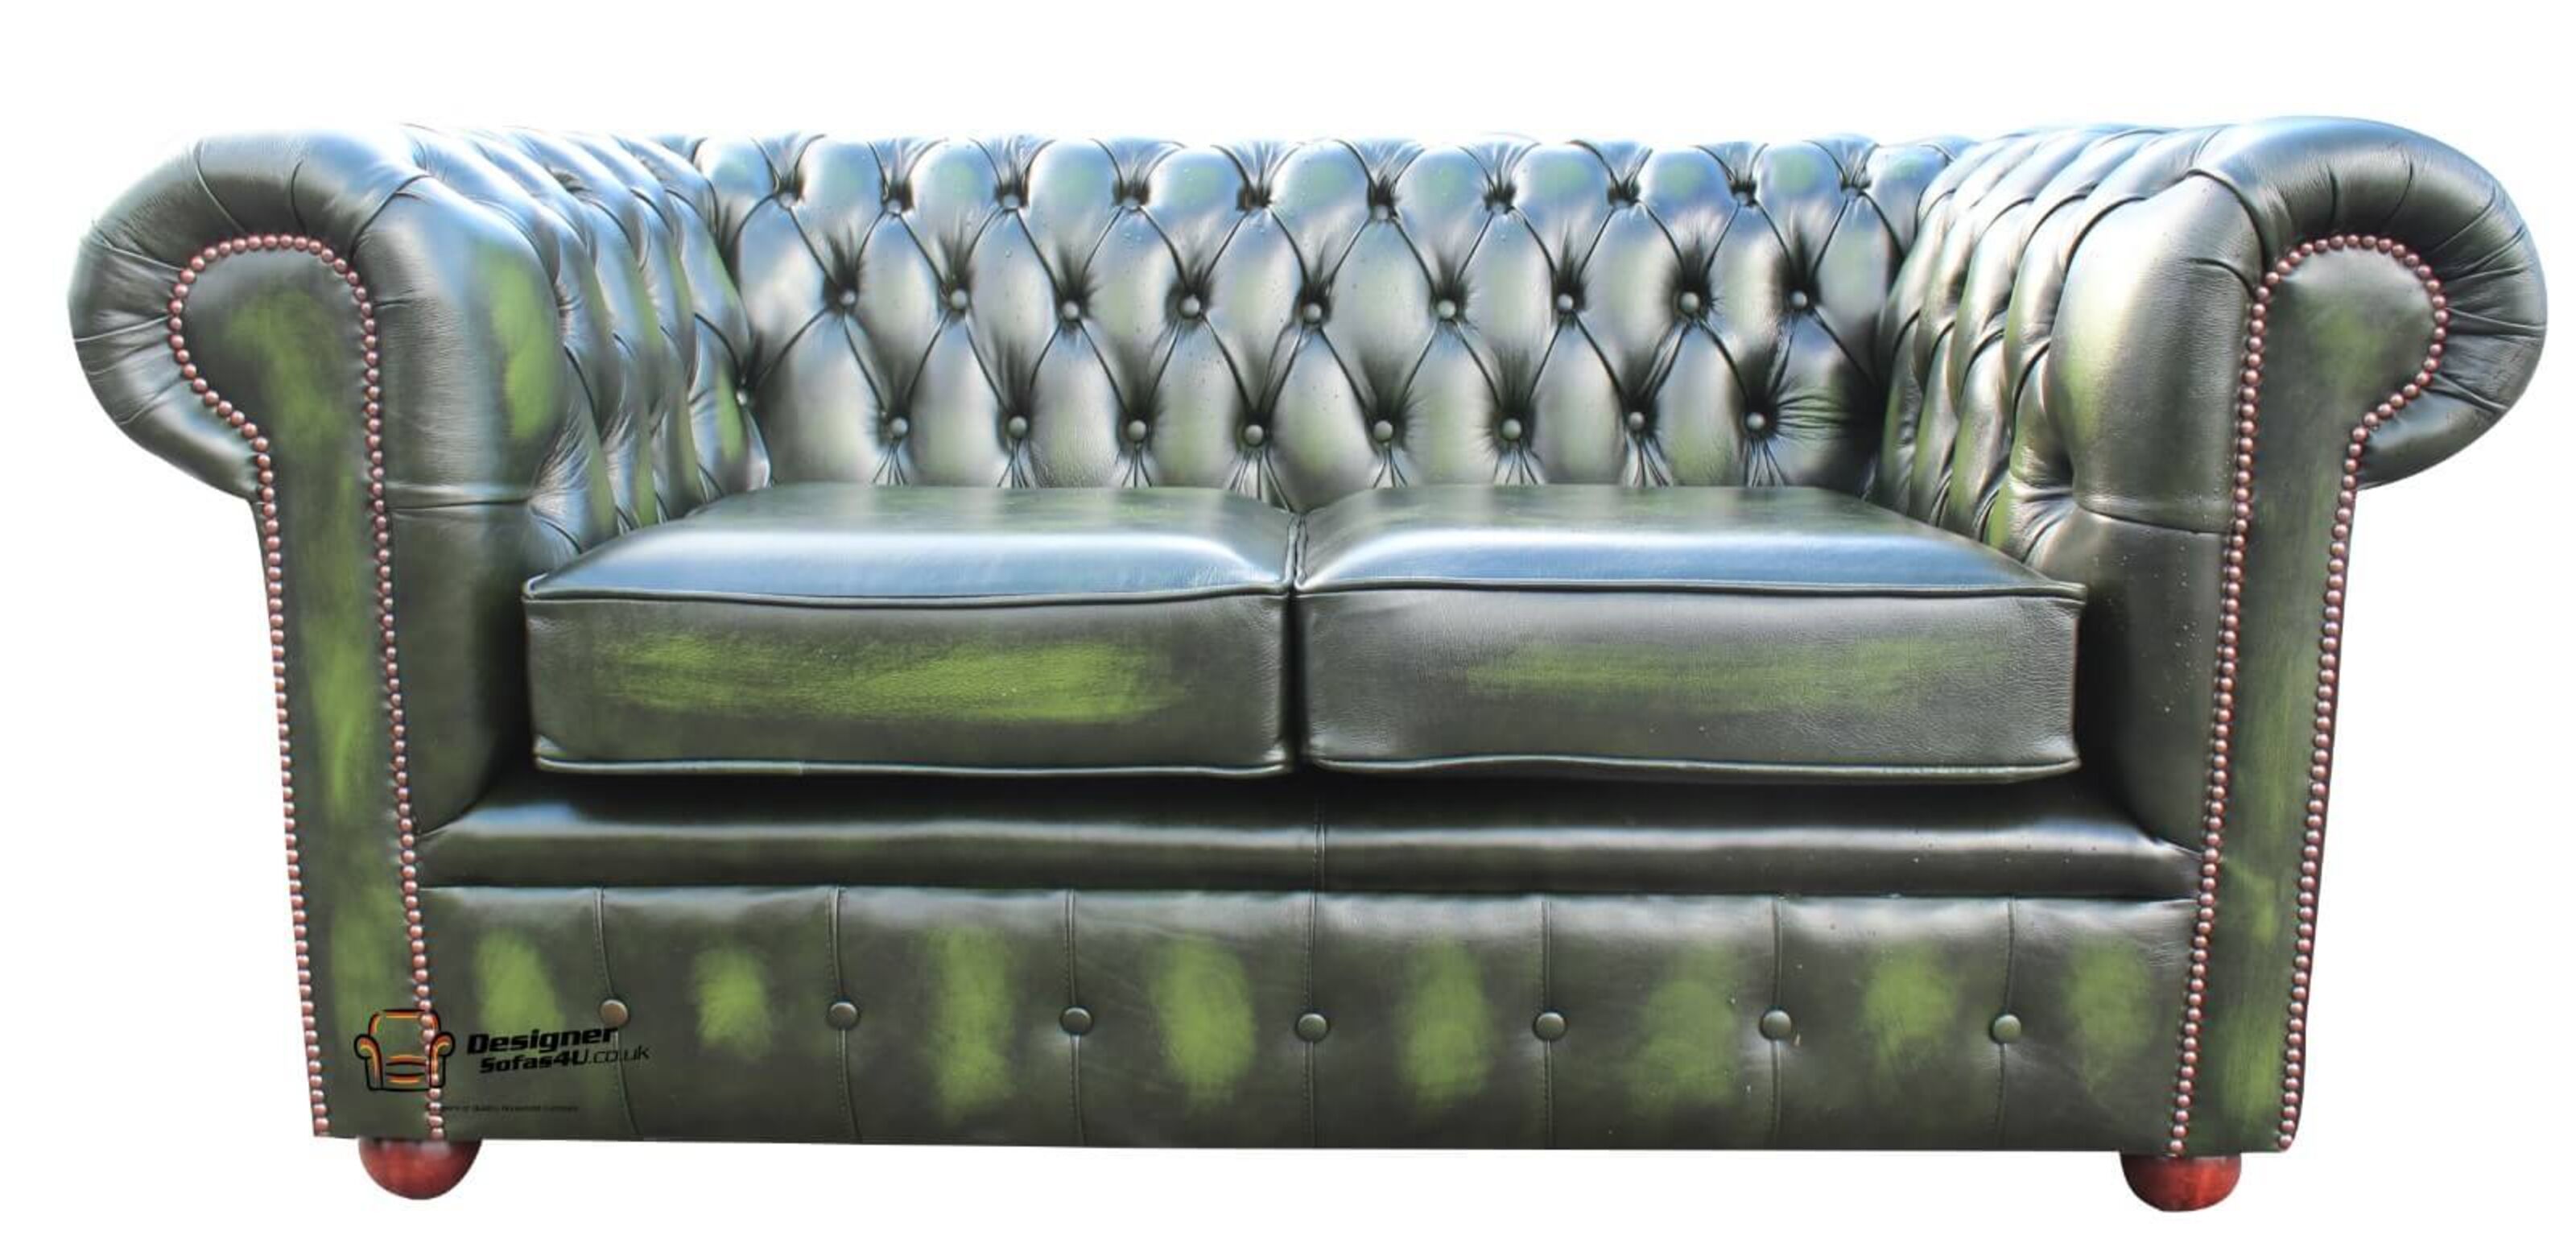 Green Glamour Styling Your Space with an Emerald Green Chesterfield Sofa  %Post Title